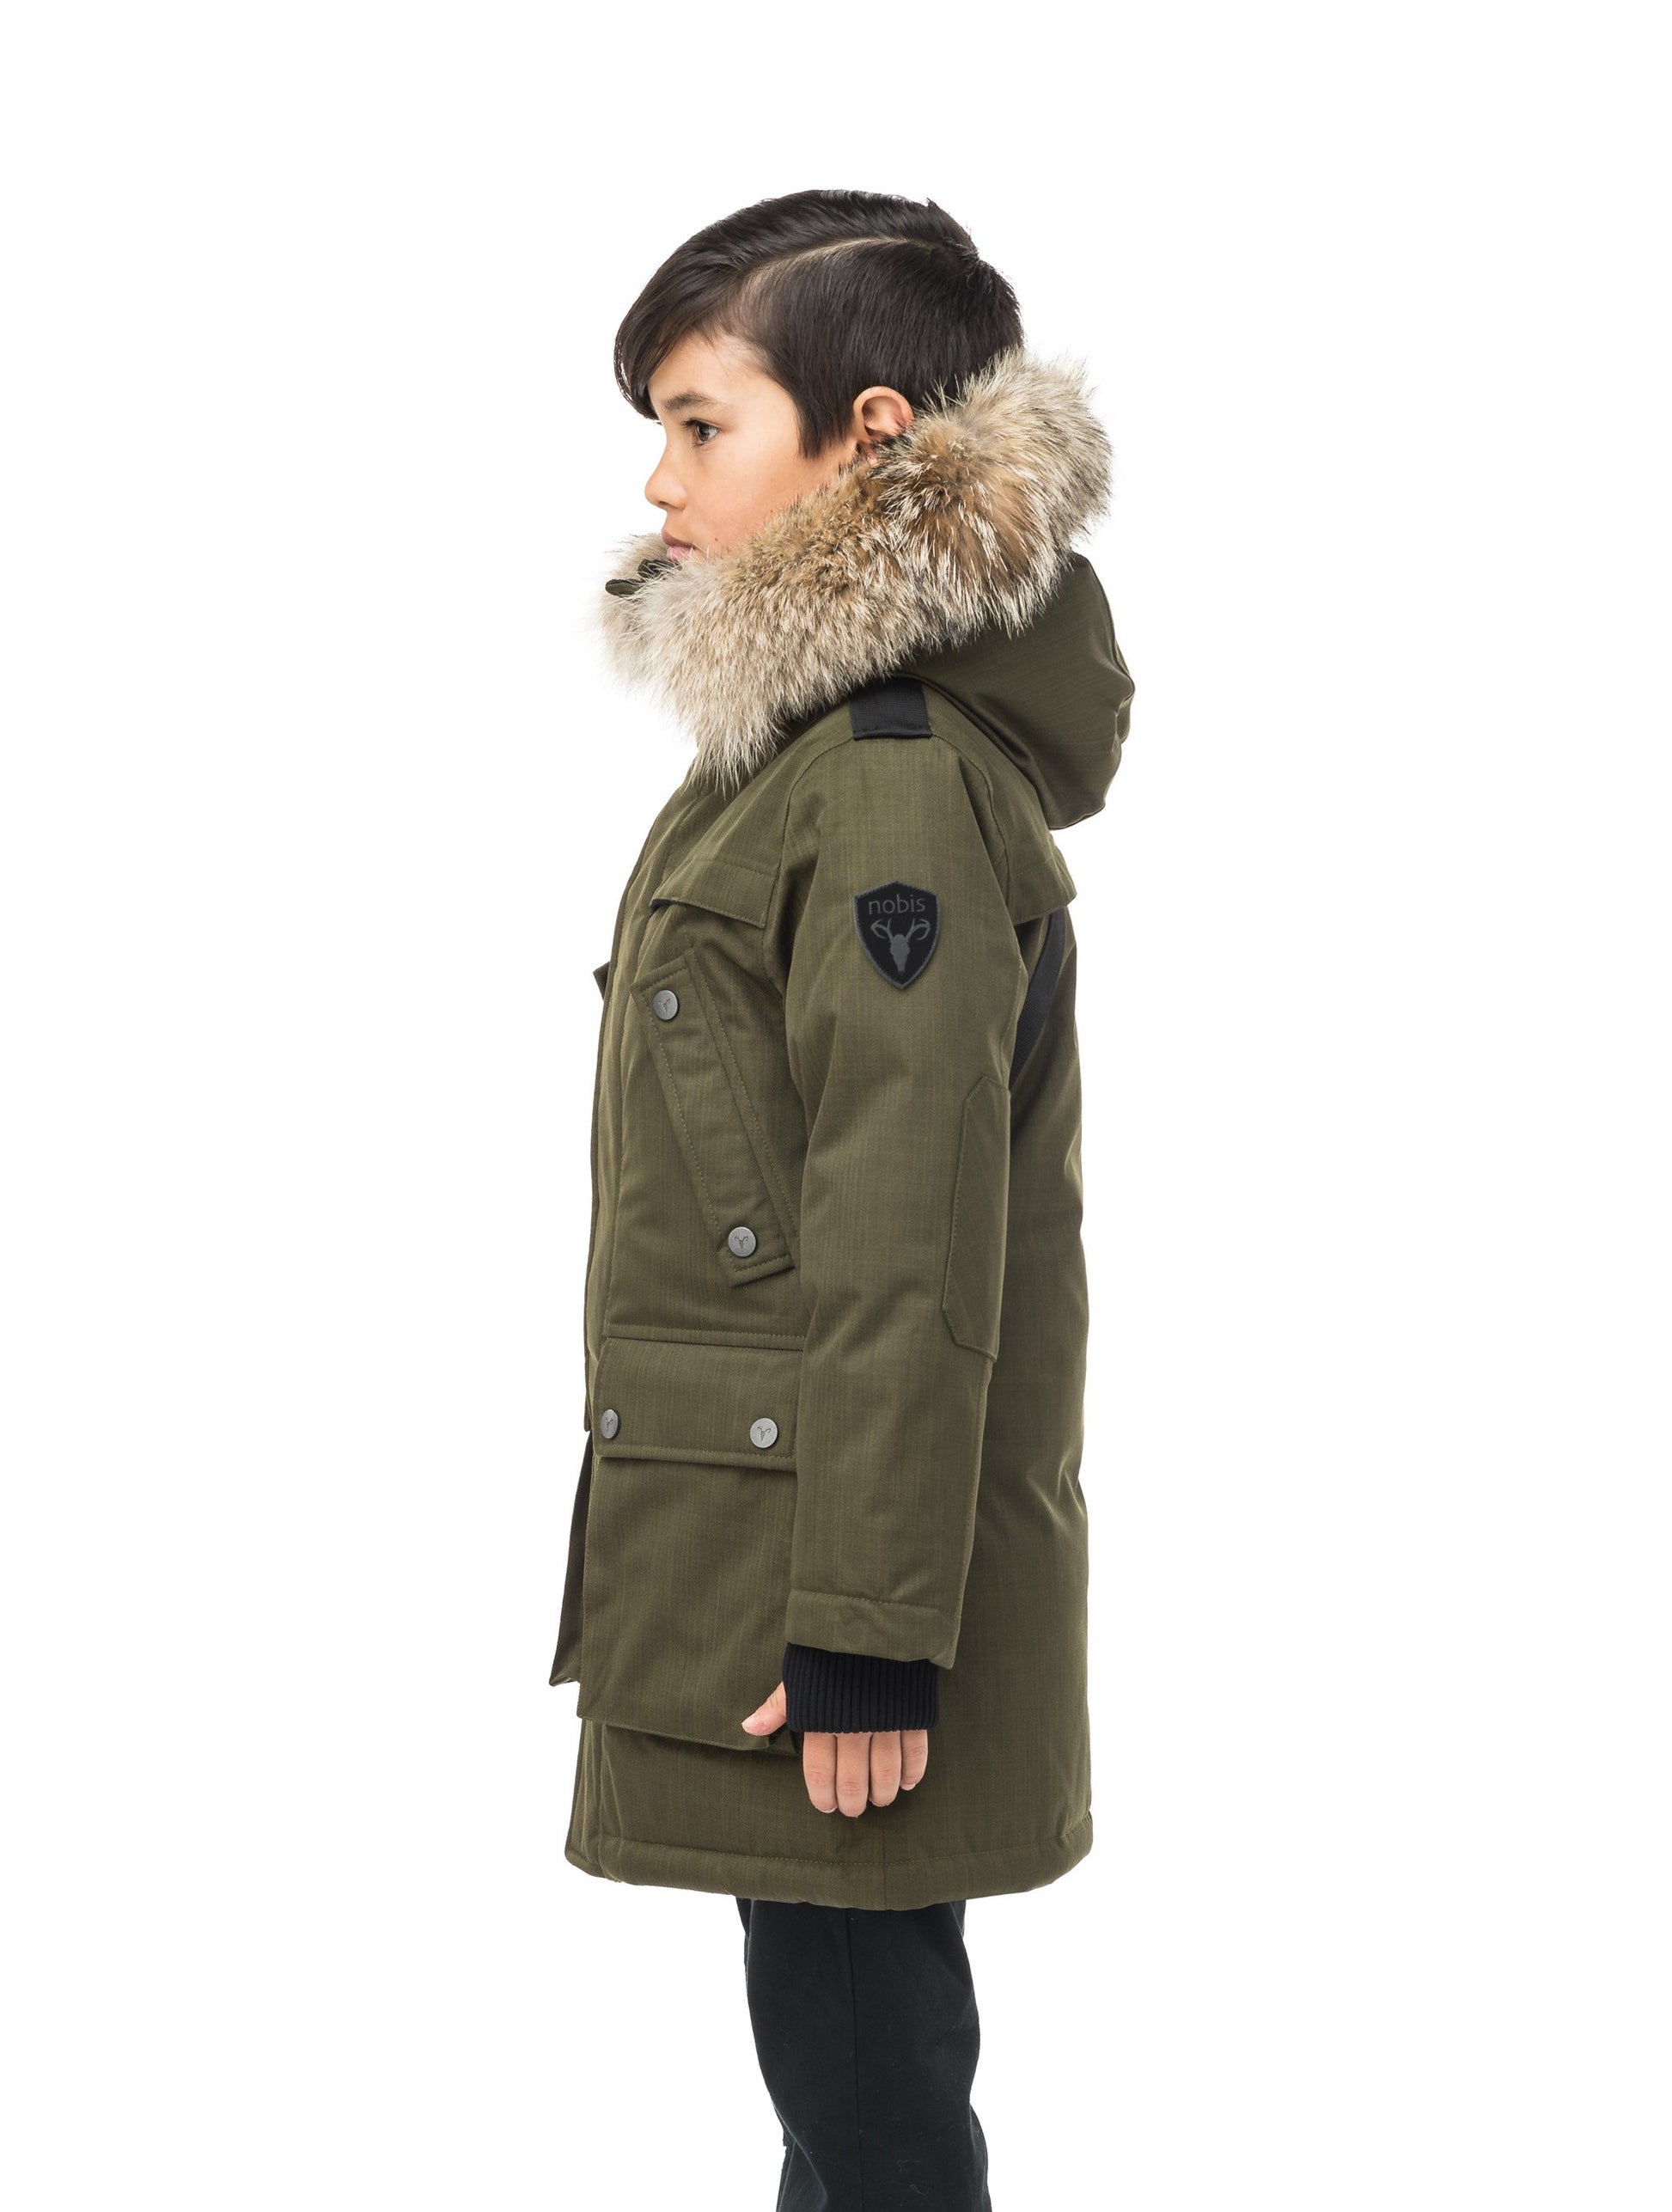 The best kid's down filled parka that's machine washable, waterproof, windproof and breathable in CH Fatigue